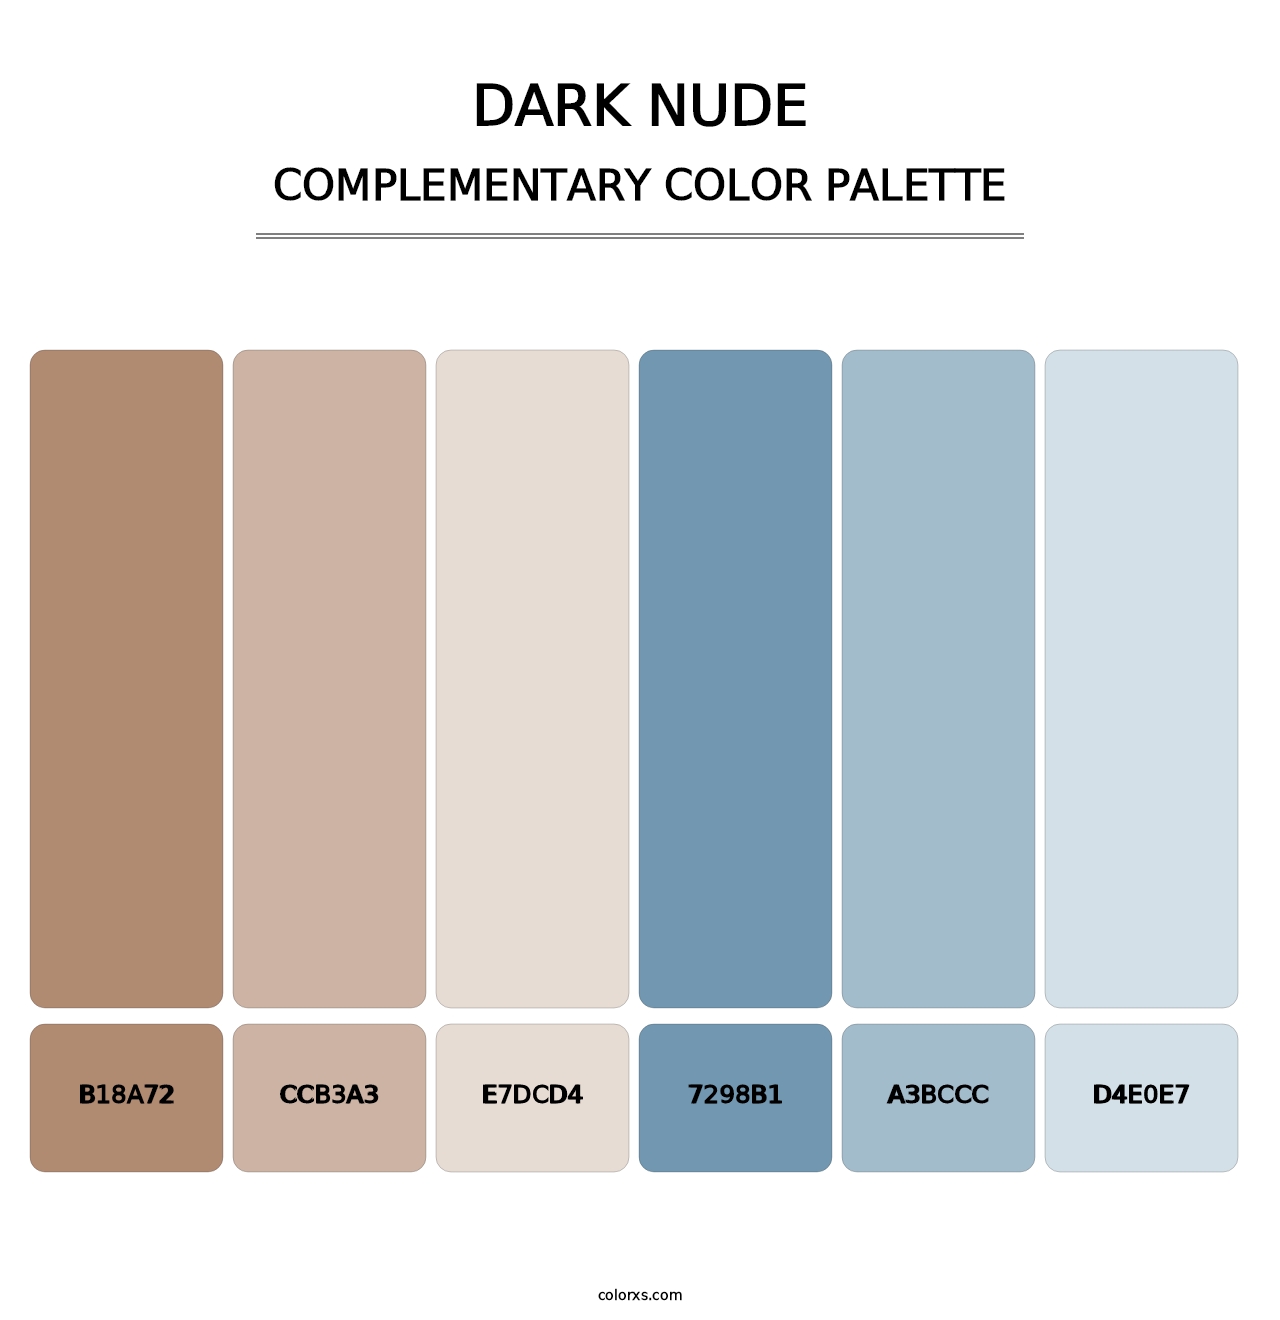 Dark Nude - Complementary Color Palette